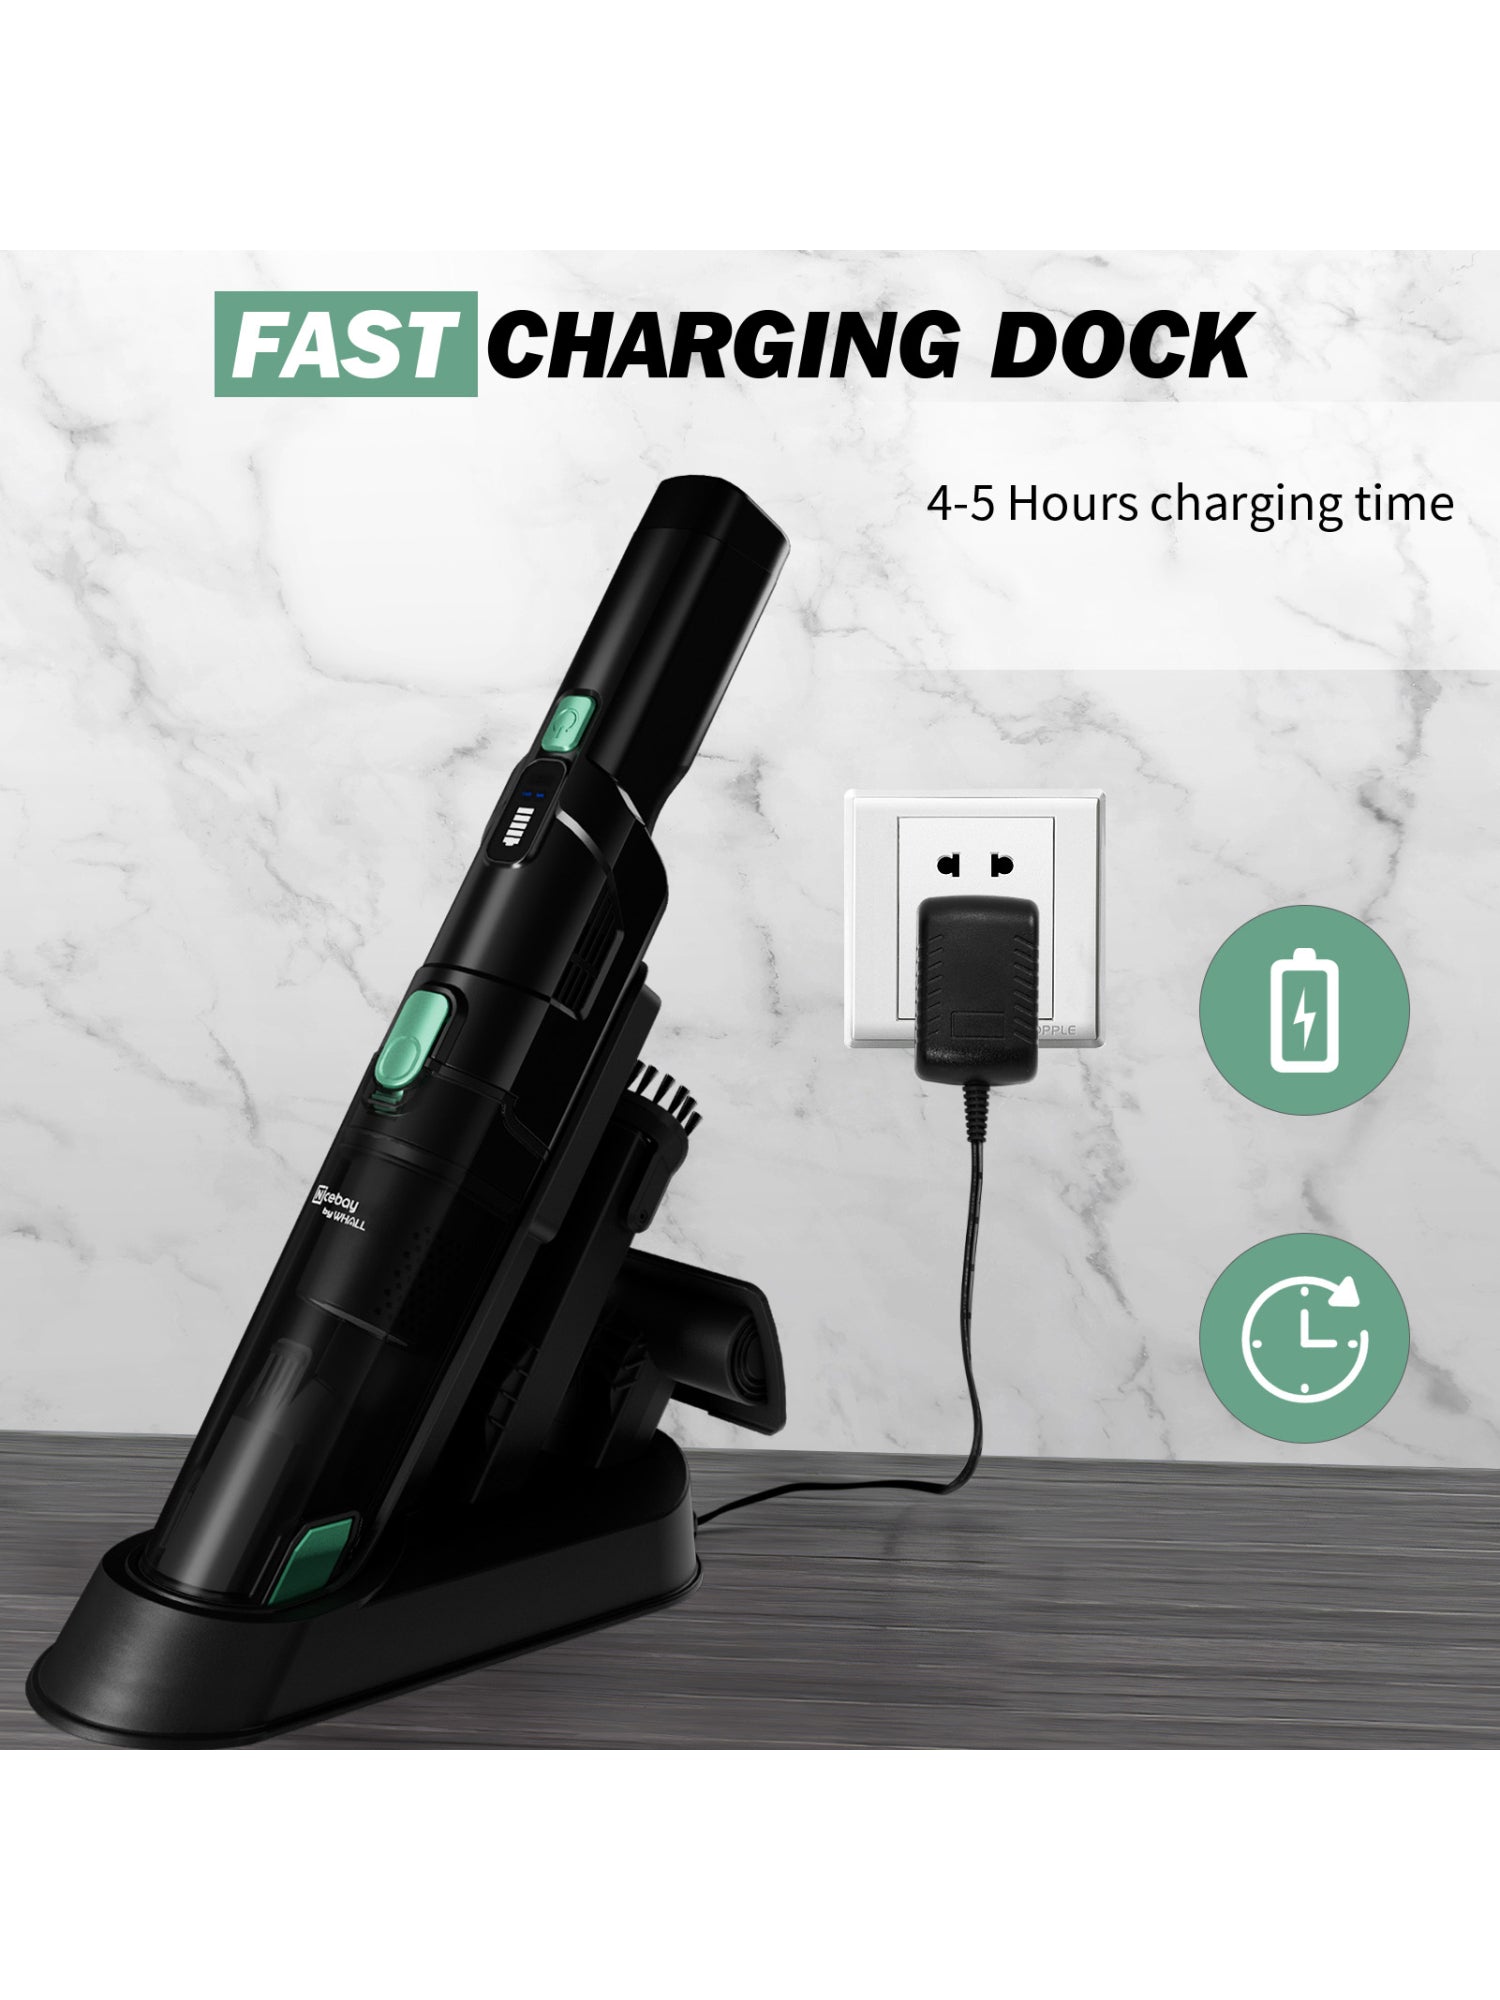 WHALL® Handheld Cordless Vacuum, Portable Vacuum with 15KPA Suction, Fast Charging, EV-H061 (New)